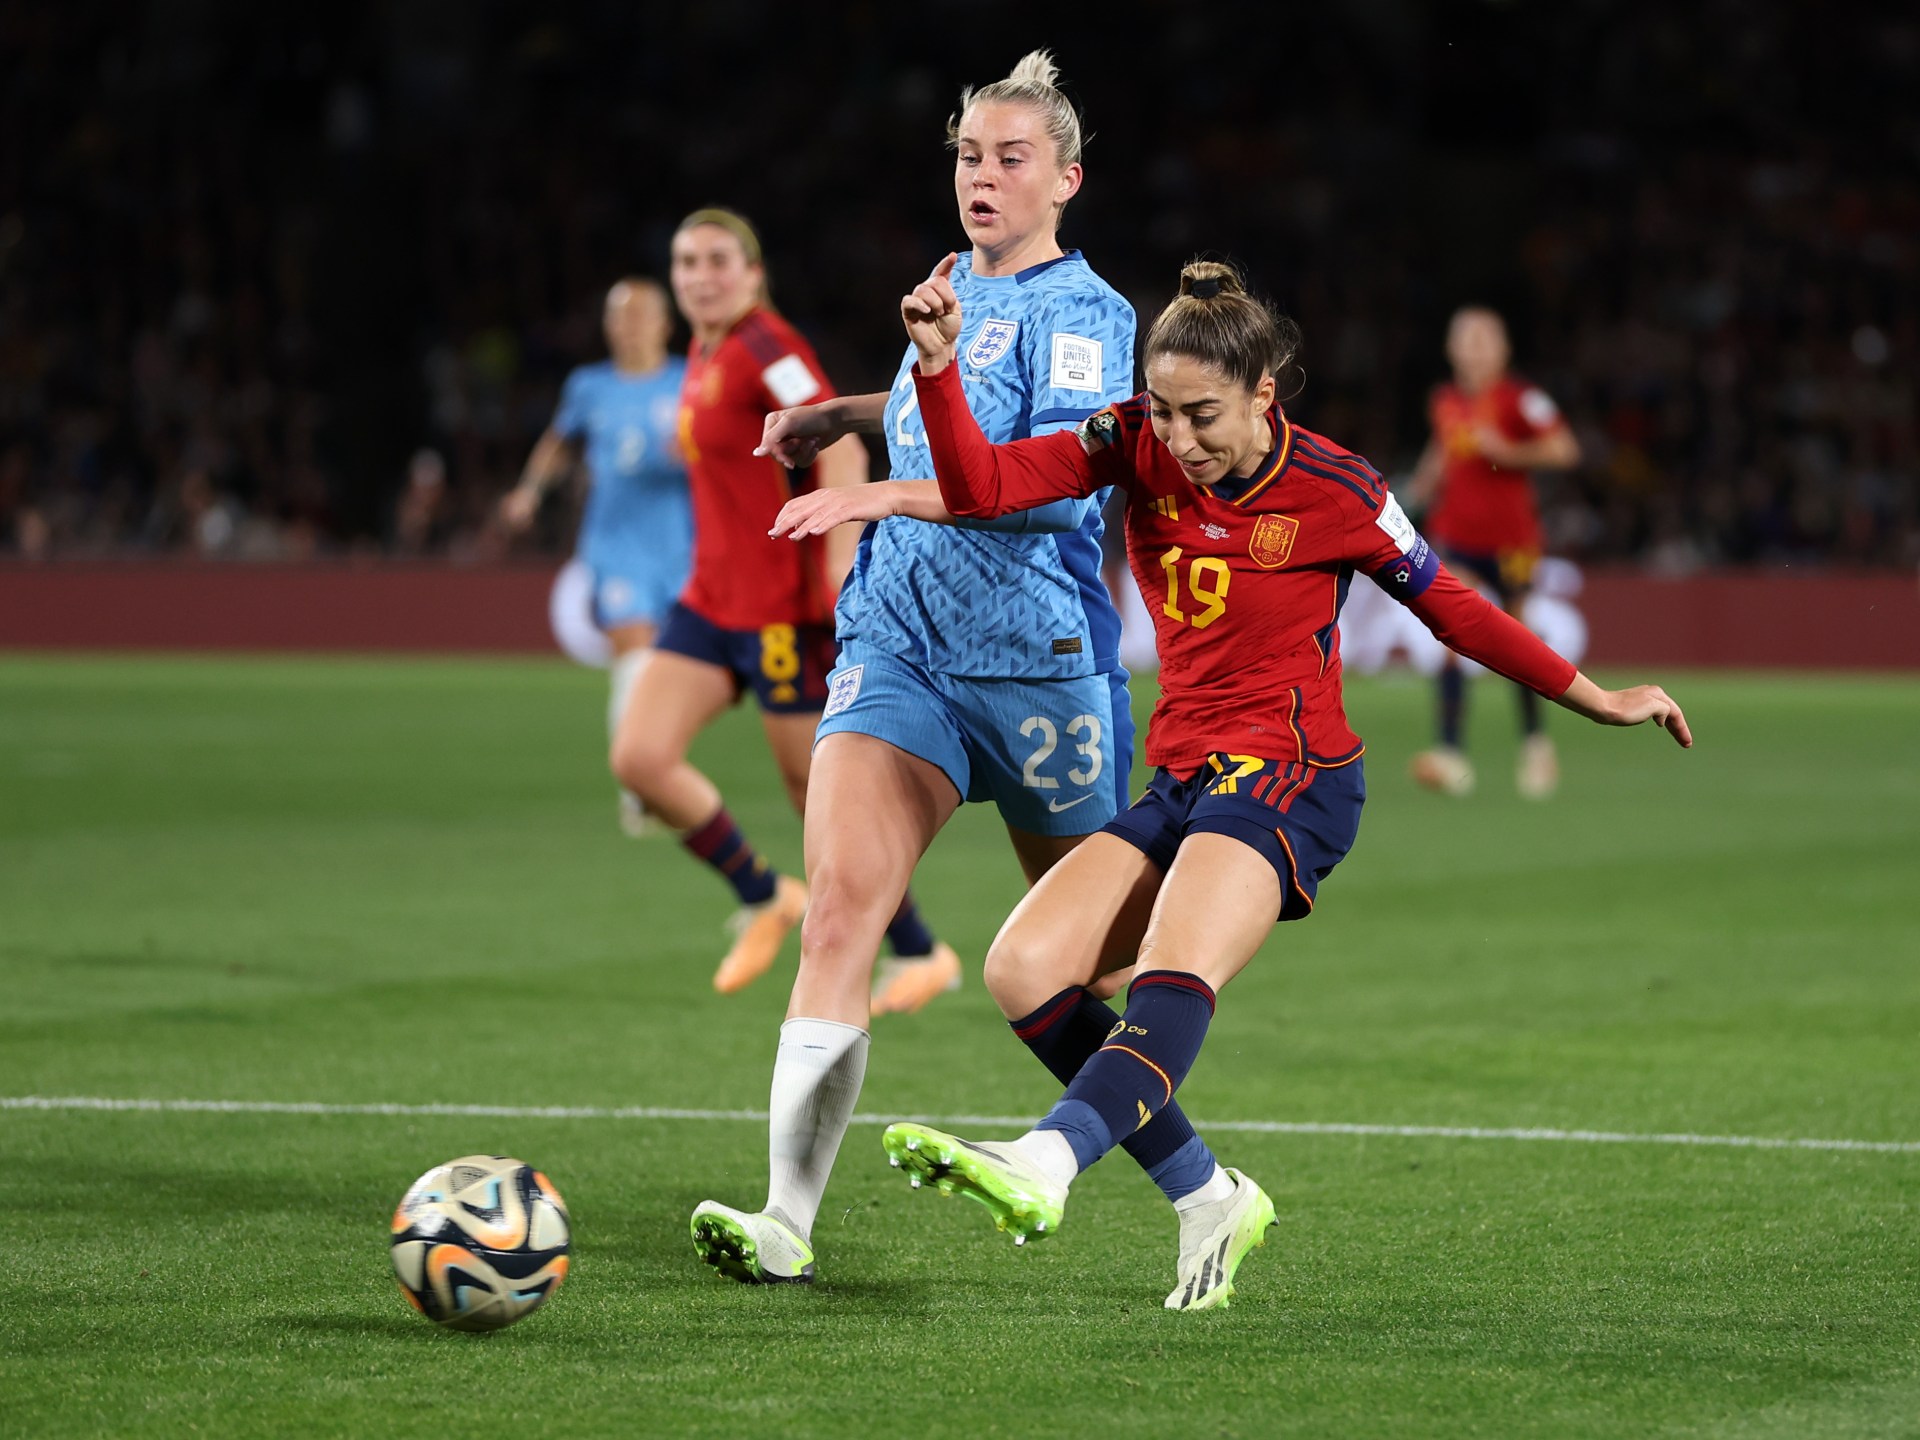 Spain beat England 1-0 to win first Women’s World Cup title